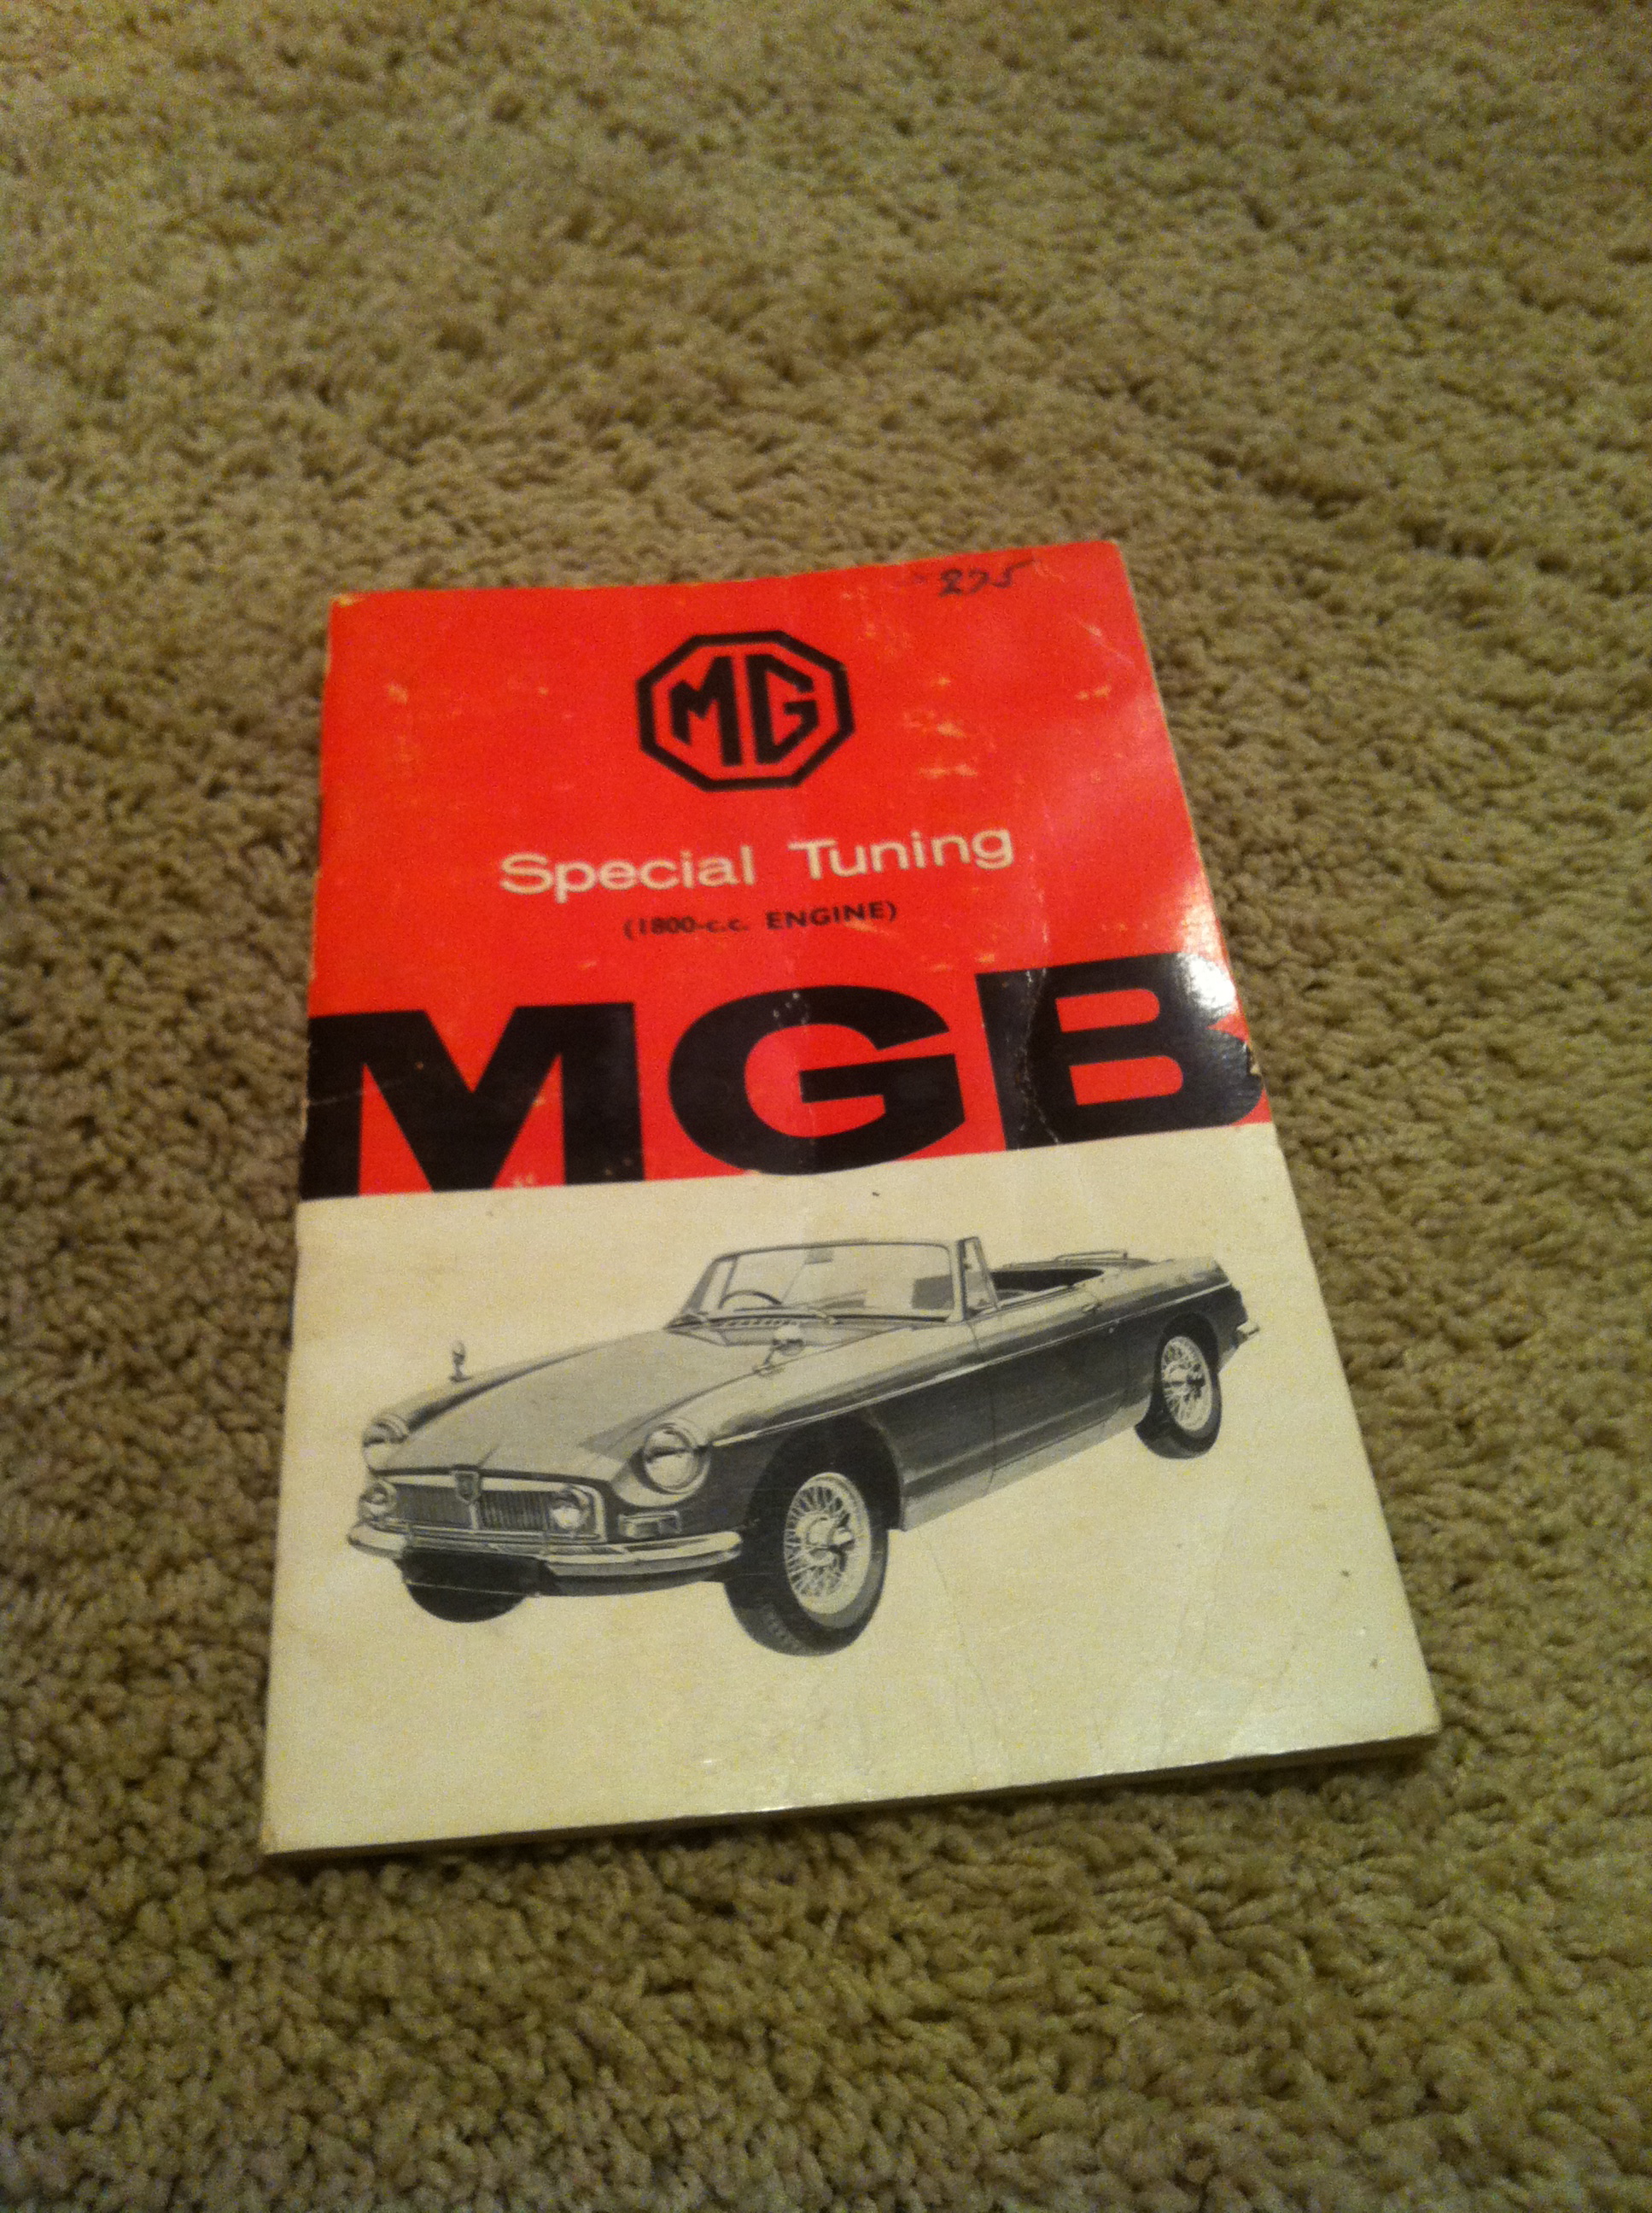 Special Tuning manual I have a later reprint of the same literature